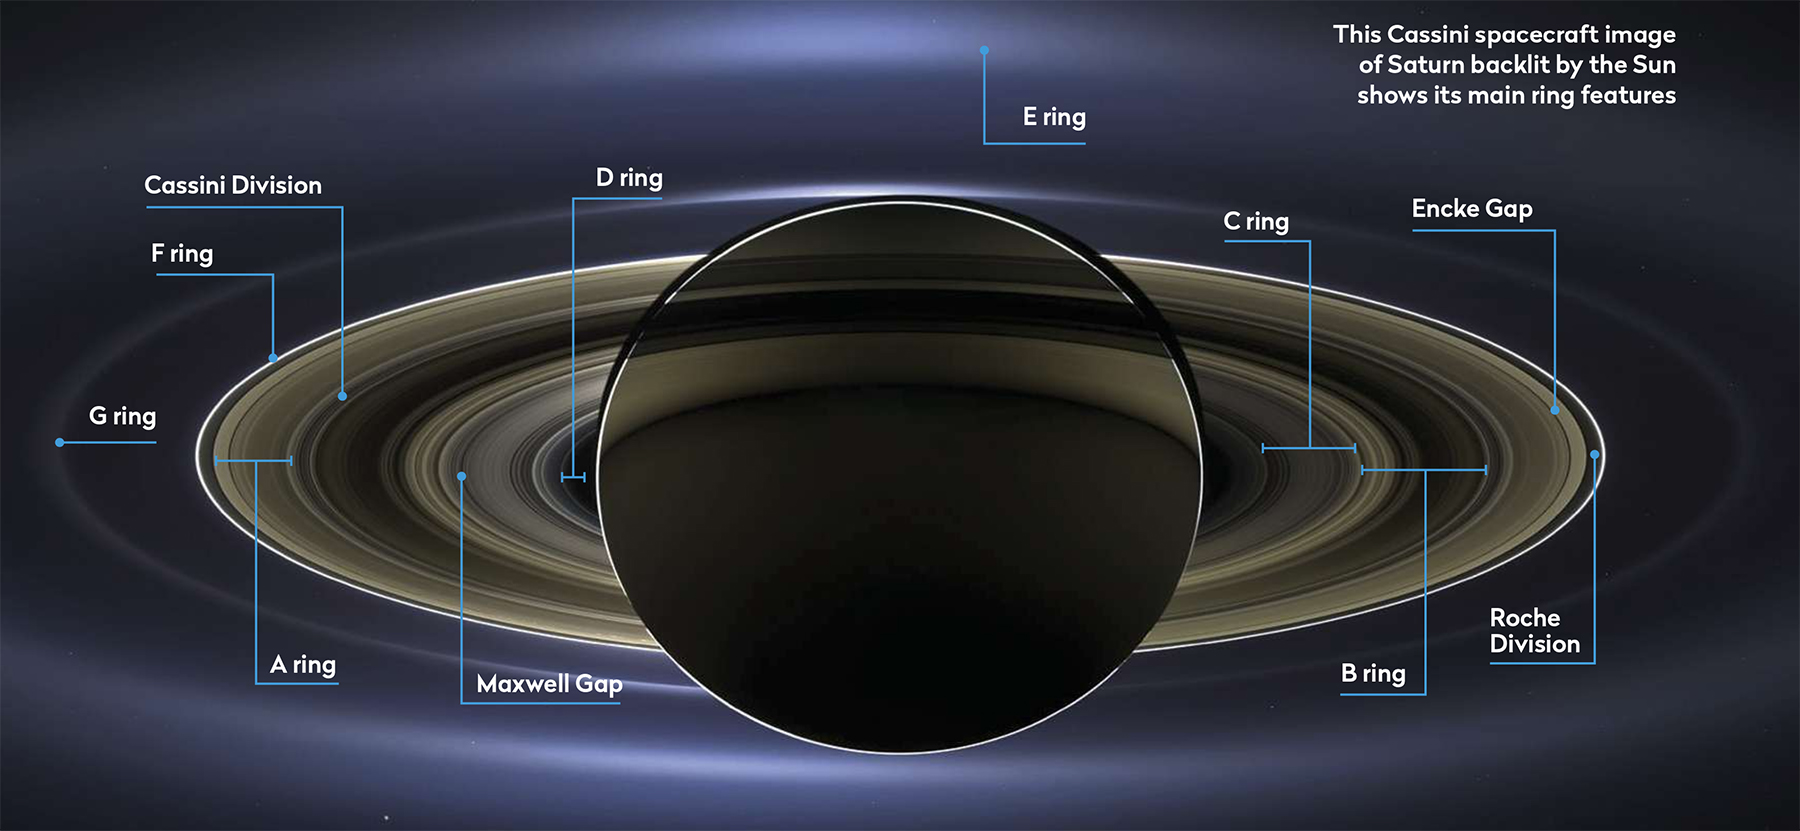 Everything You Need to Know about the Ruling Planet Saturn - HubPages